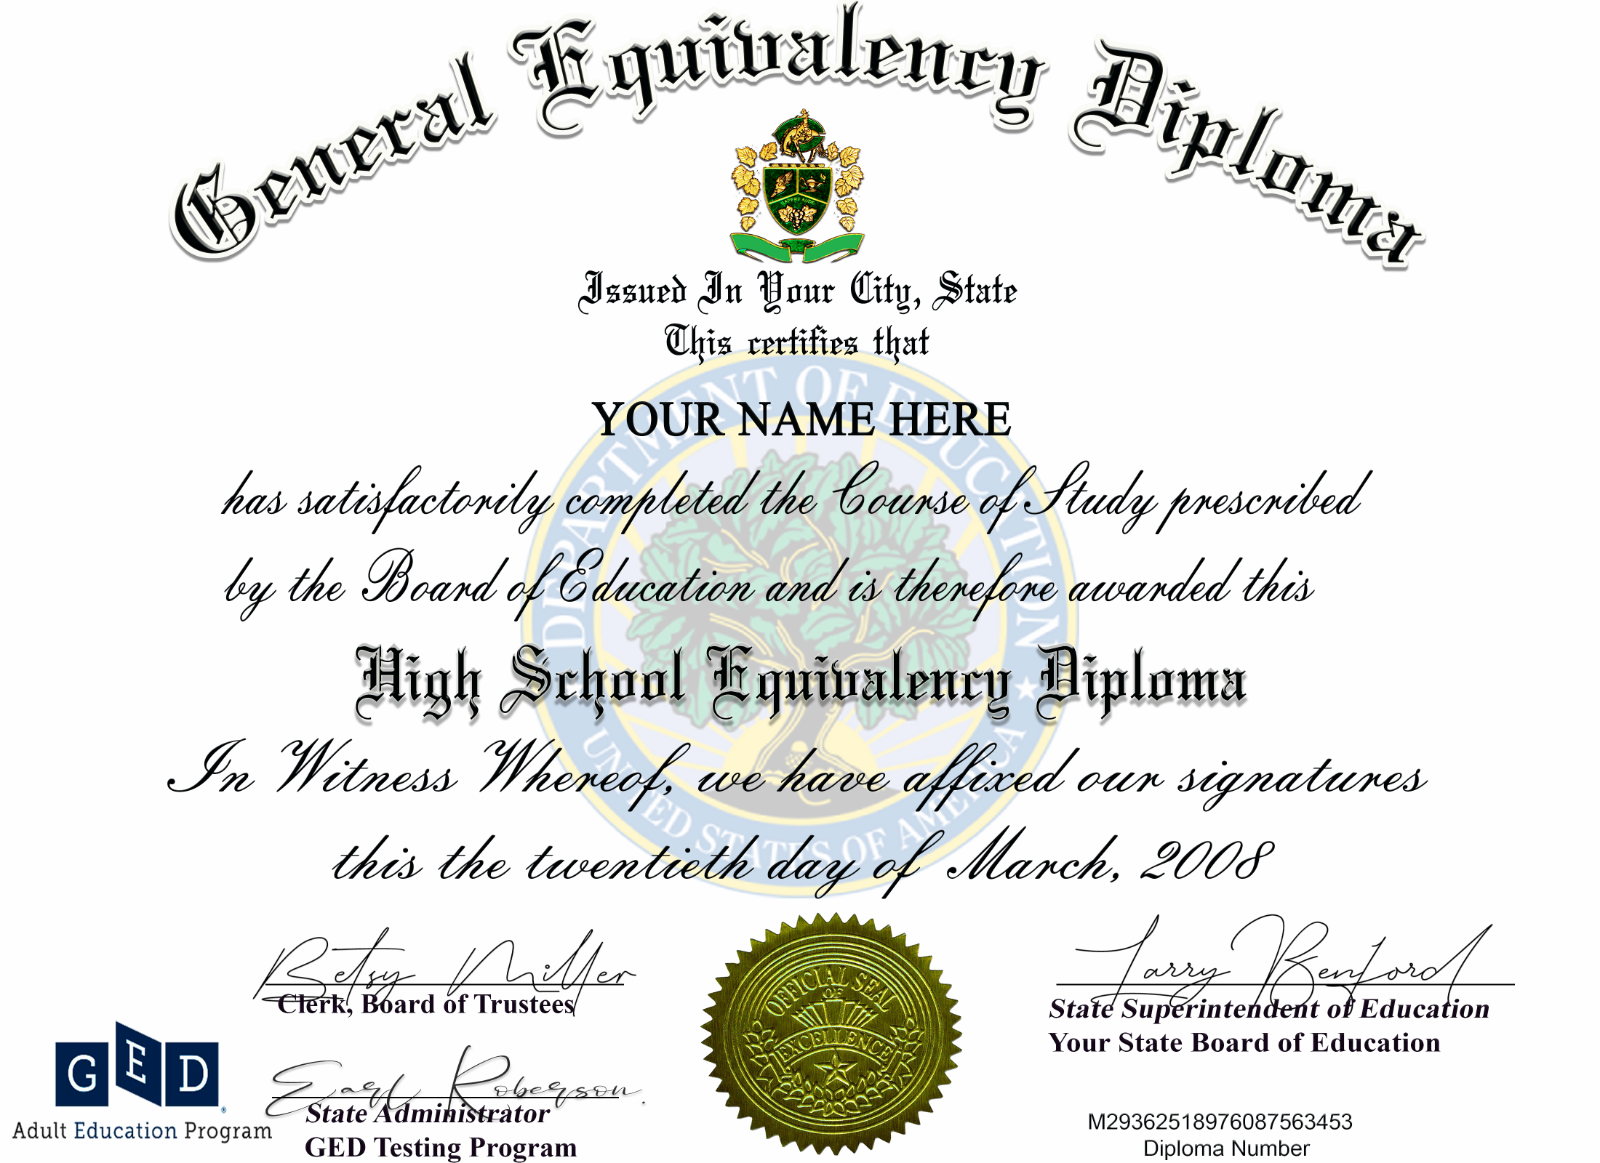 Diploma GED HIGH SCHOOL Personalized Novelty Diplomas Rated #1